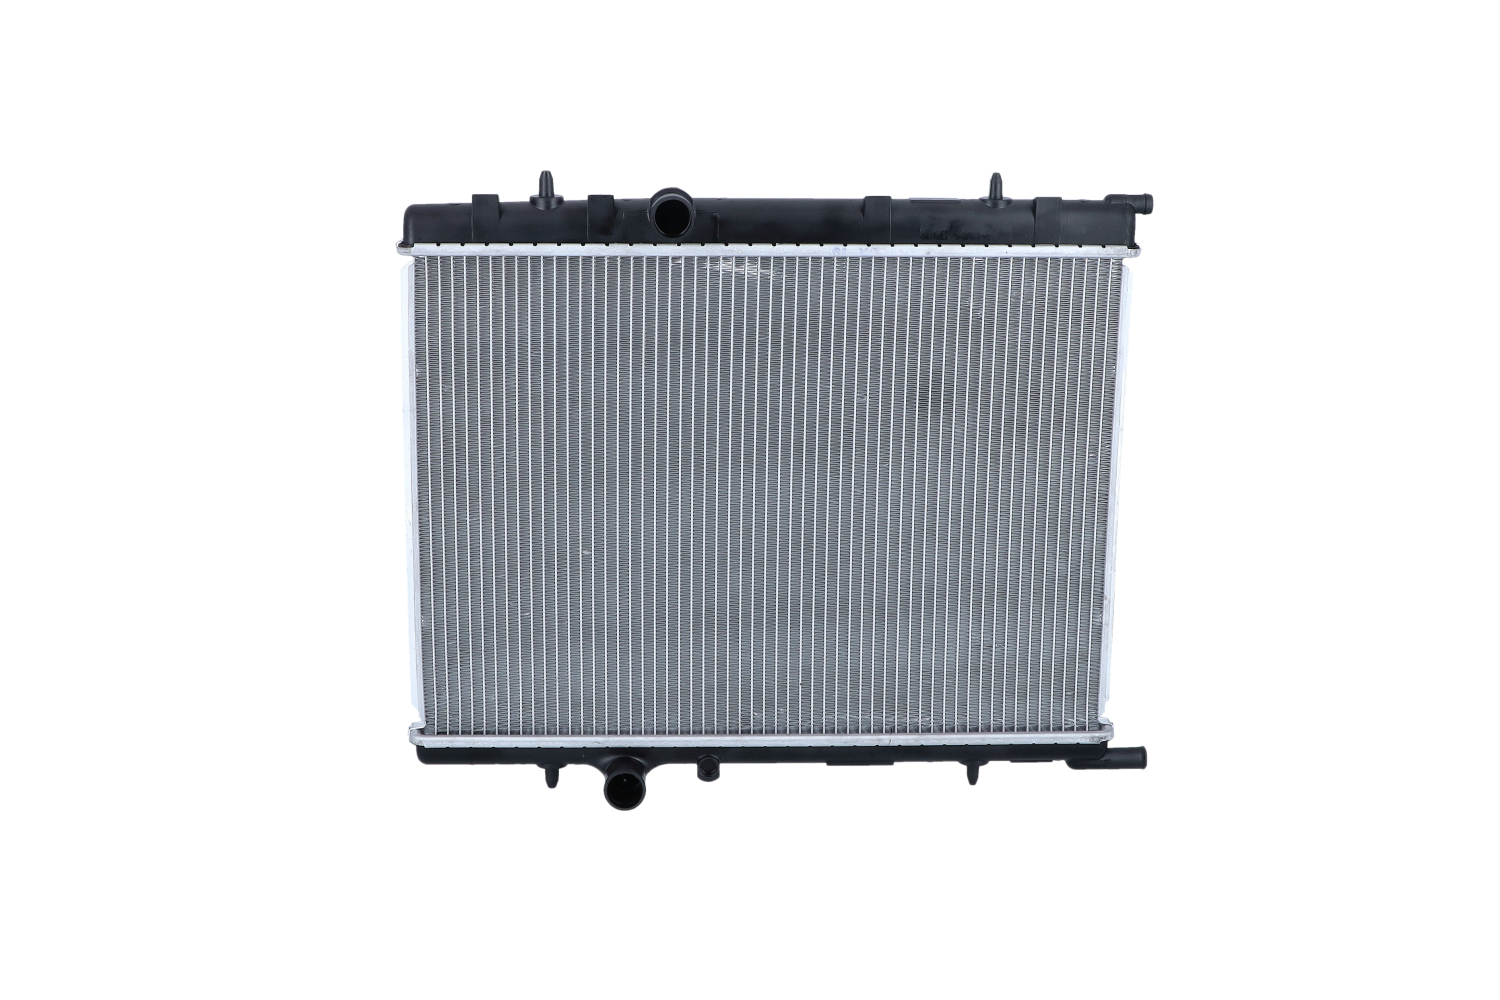 NRF EASY FIT Aluminium, 551 x 380 x 18 mm, with mounting parts, Brazed cooling fins Radiator 58304 buy